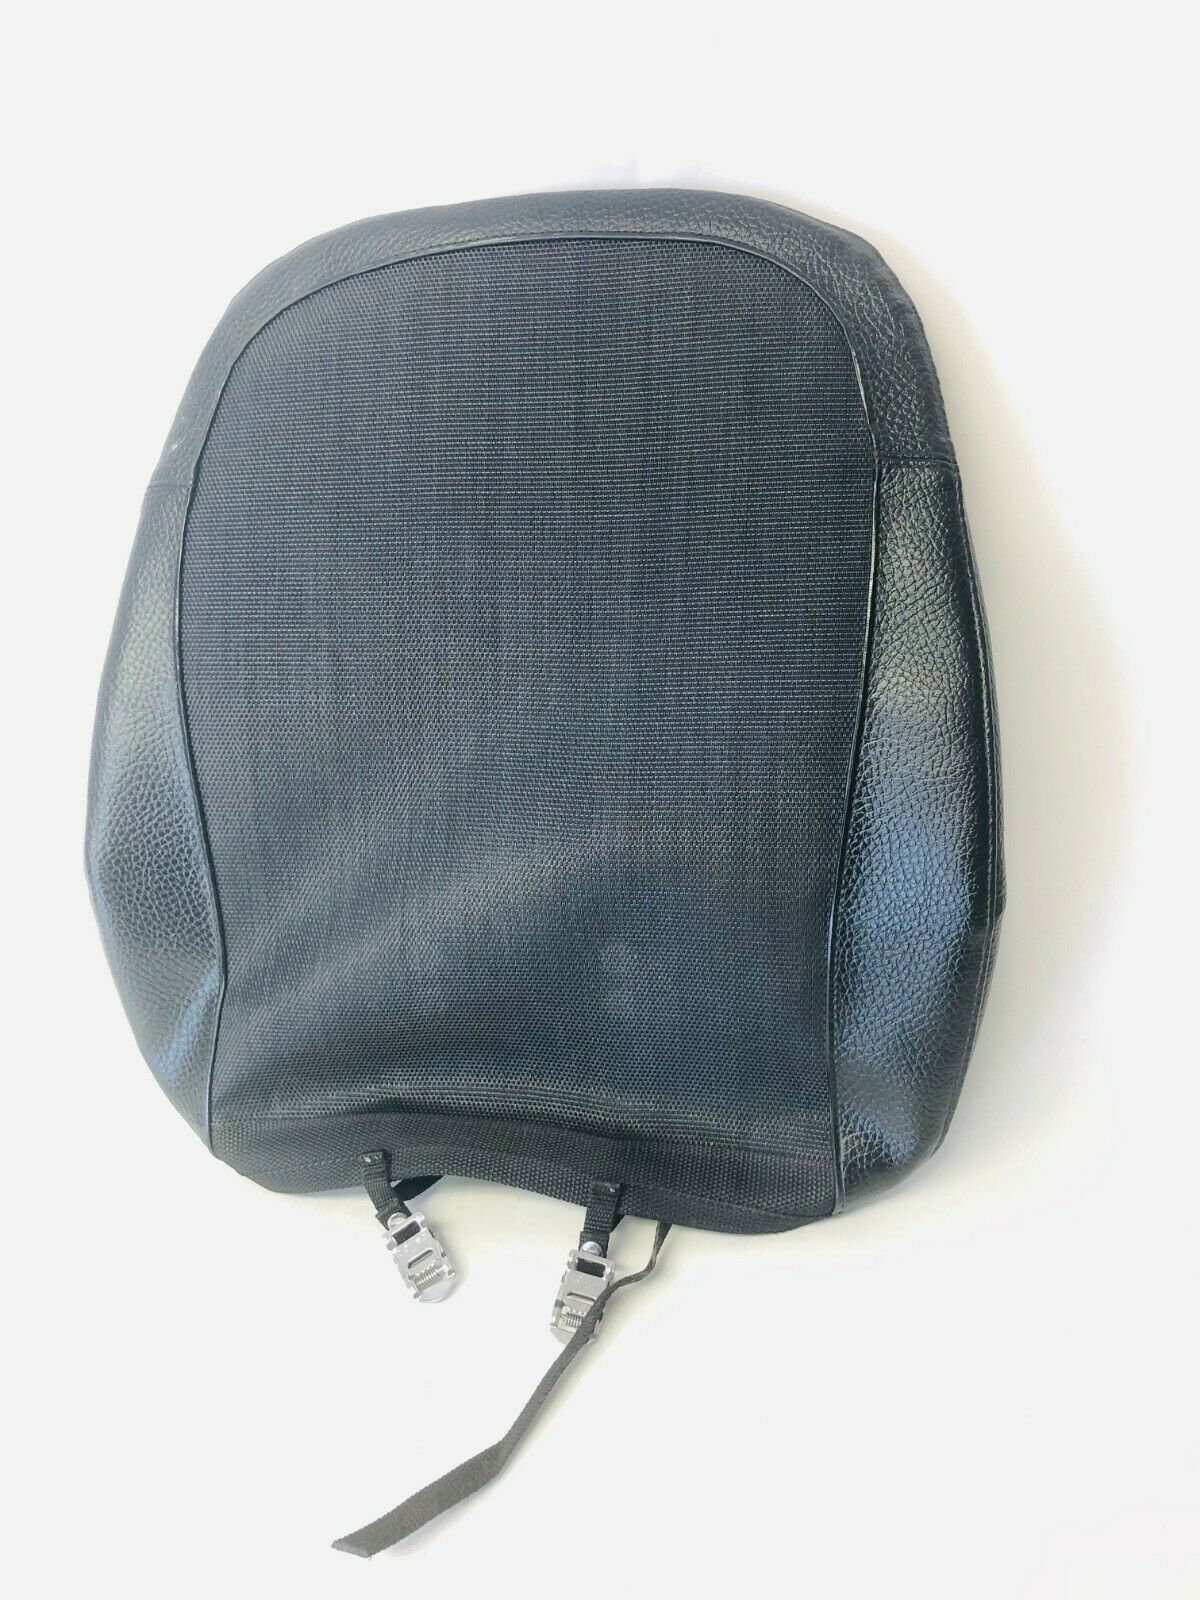 Mesh Seat Cover